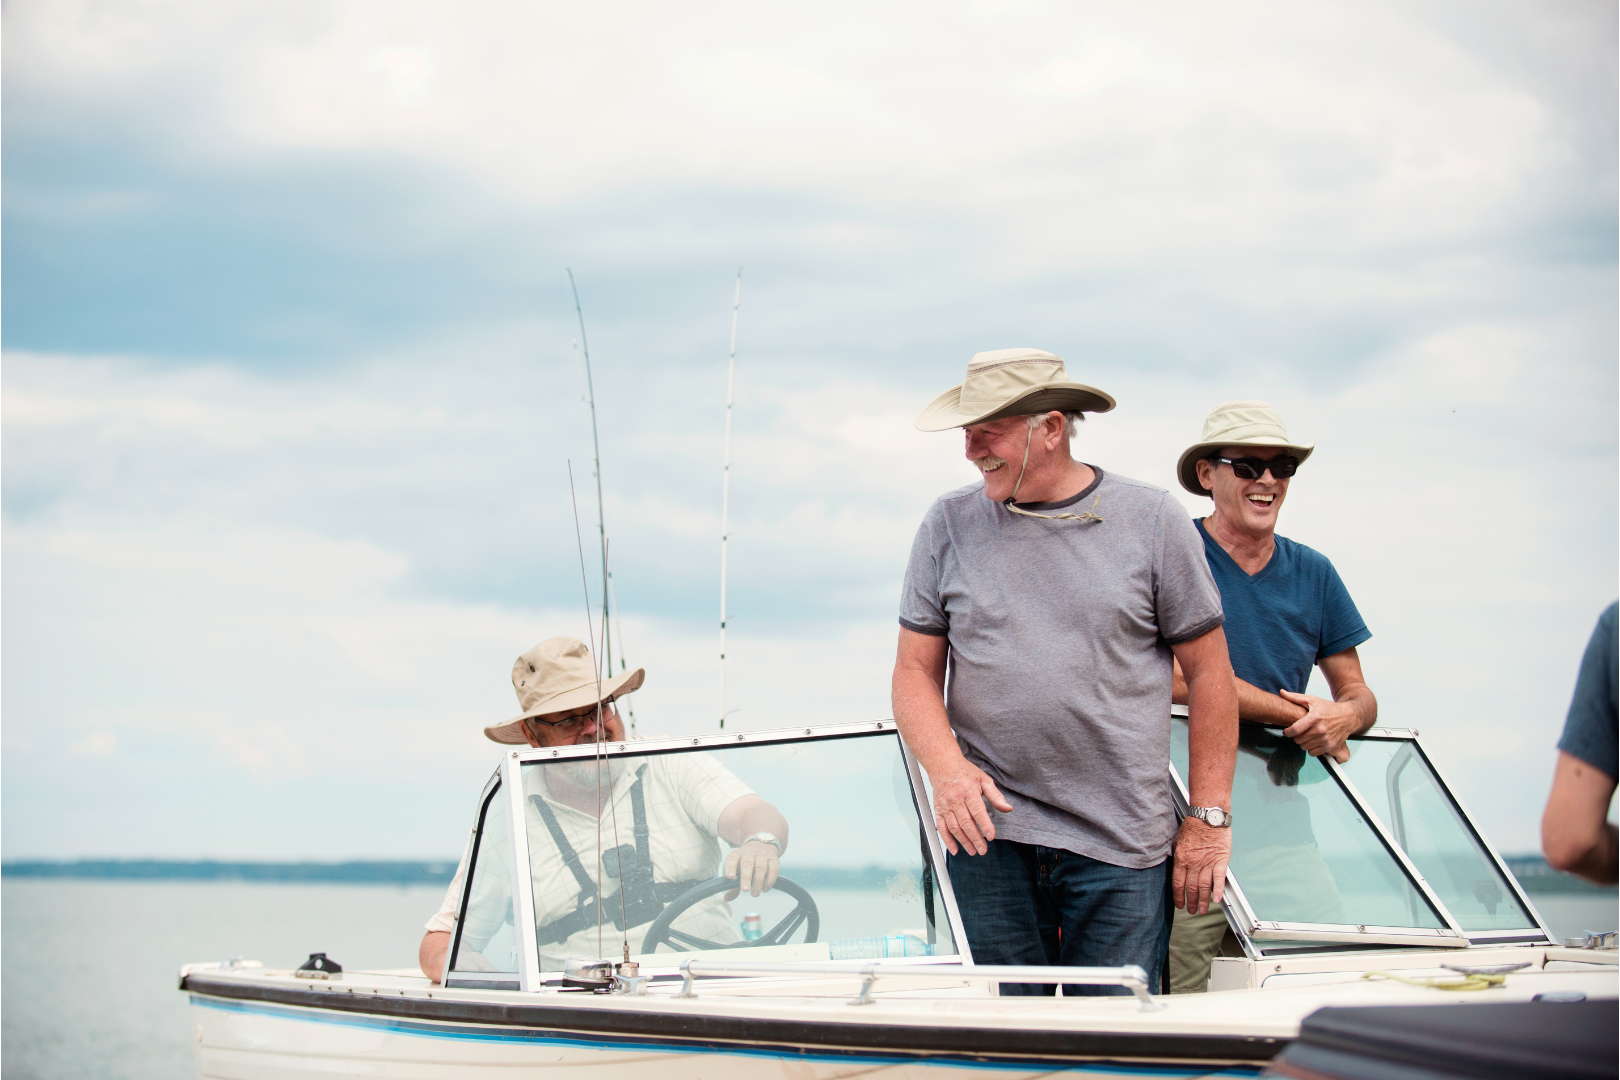 How To Plan The Best Fishing Trip